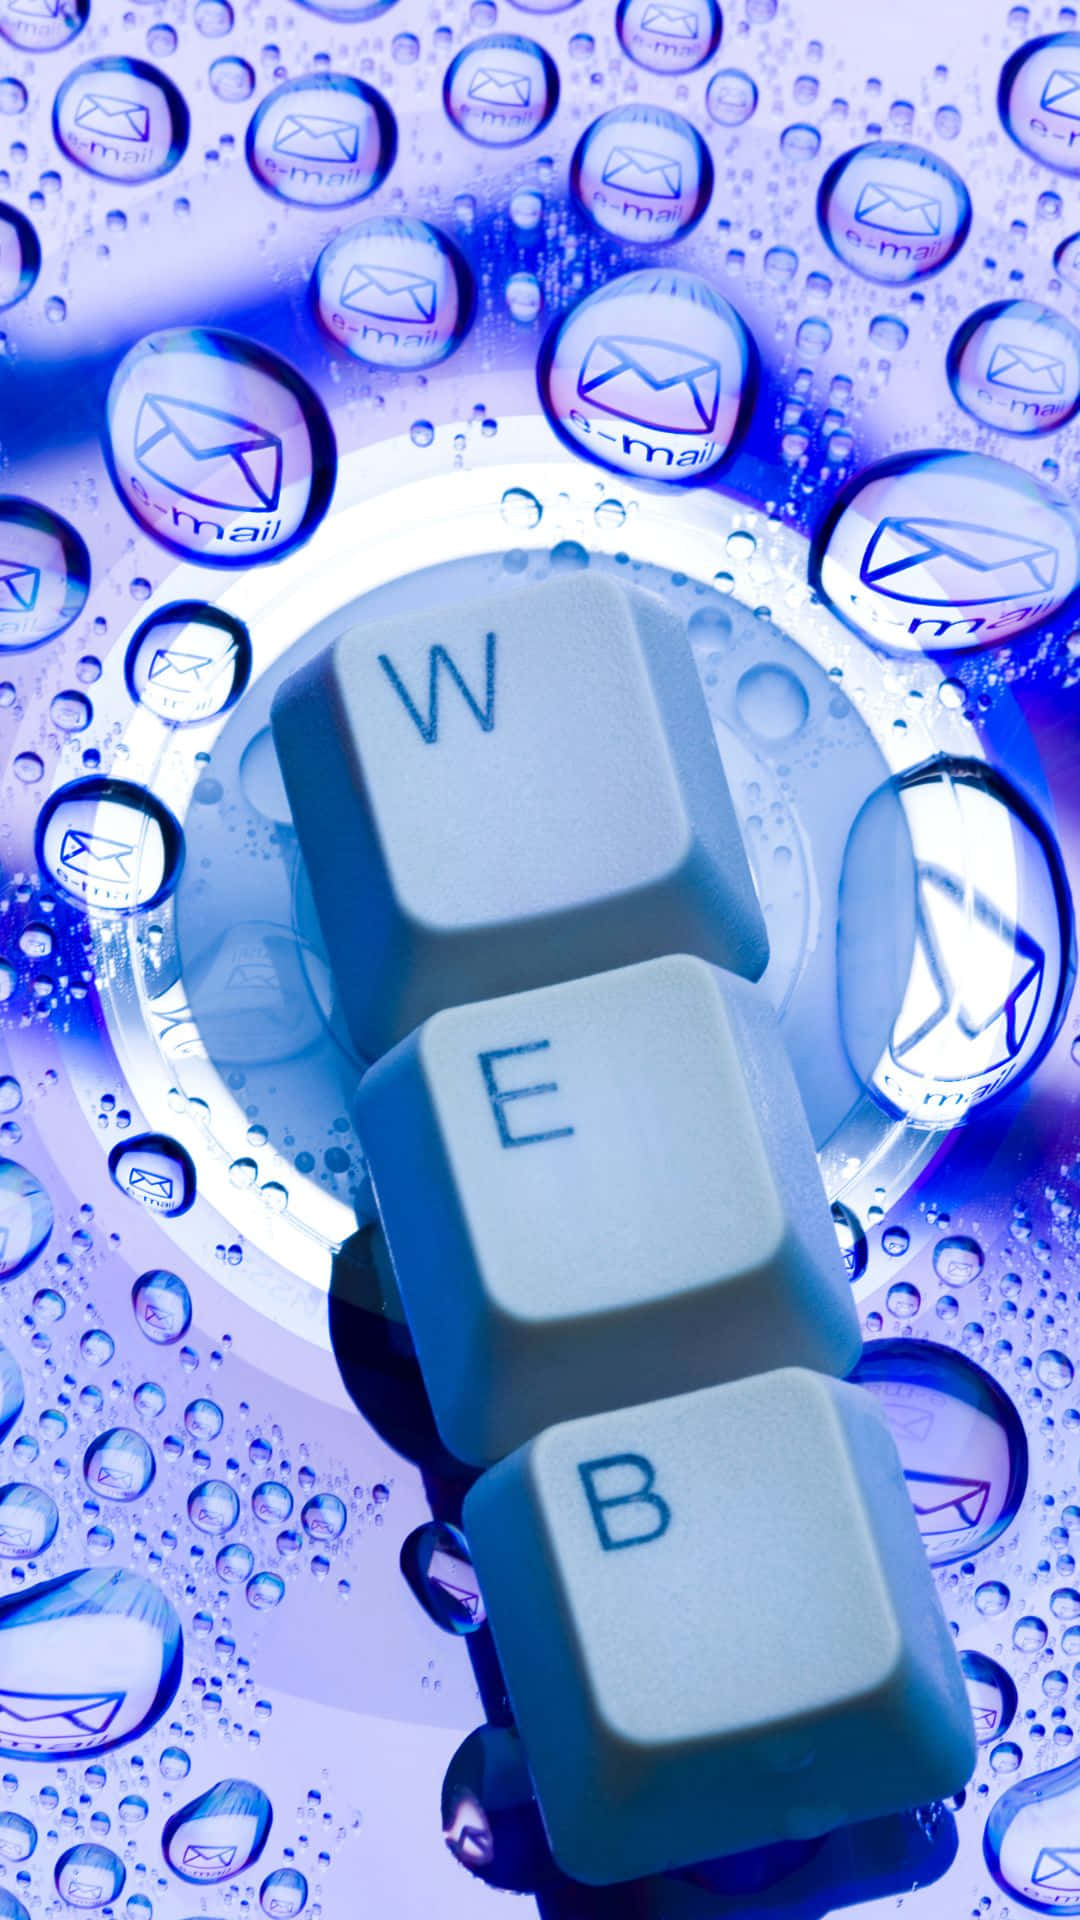 Web Connectivity Keyboard Concept Wallpaper